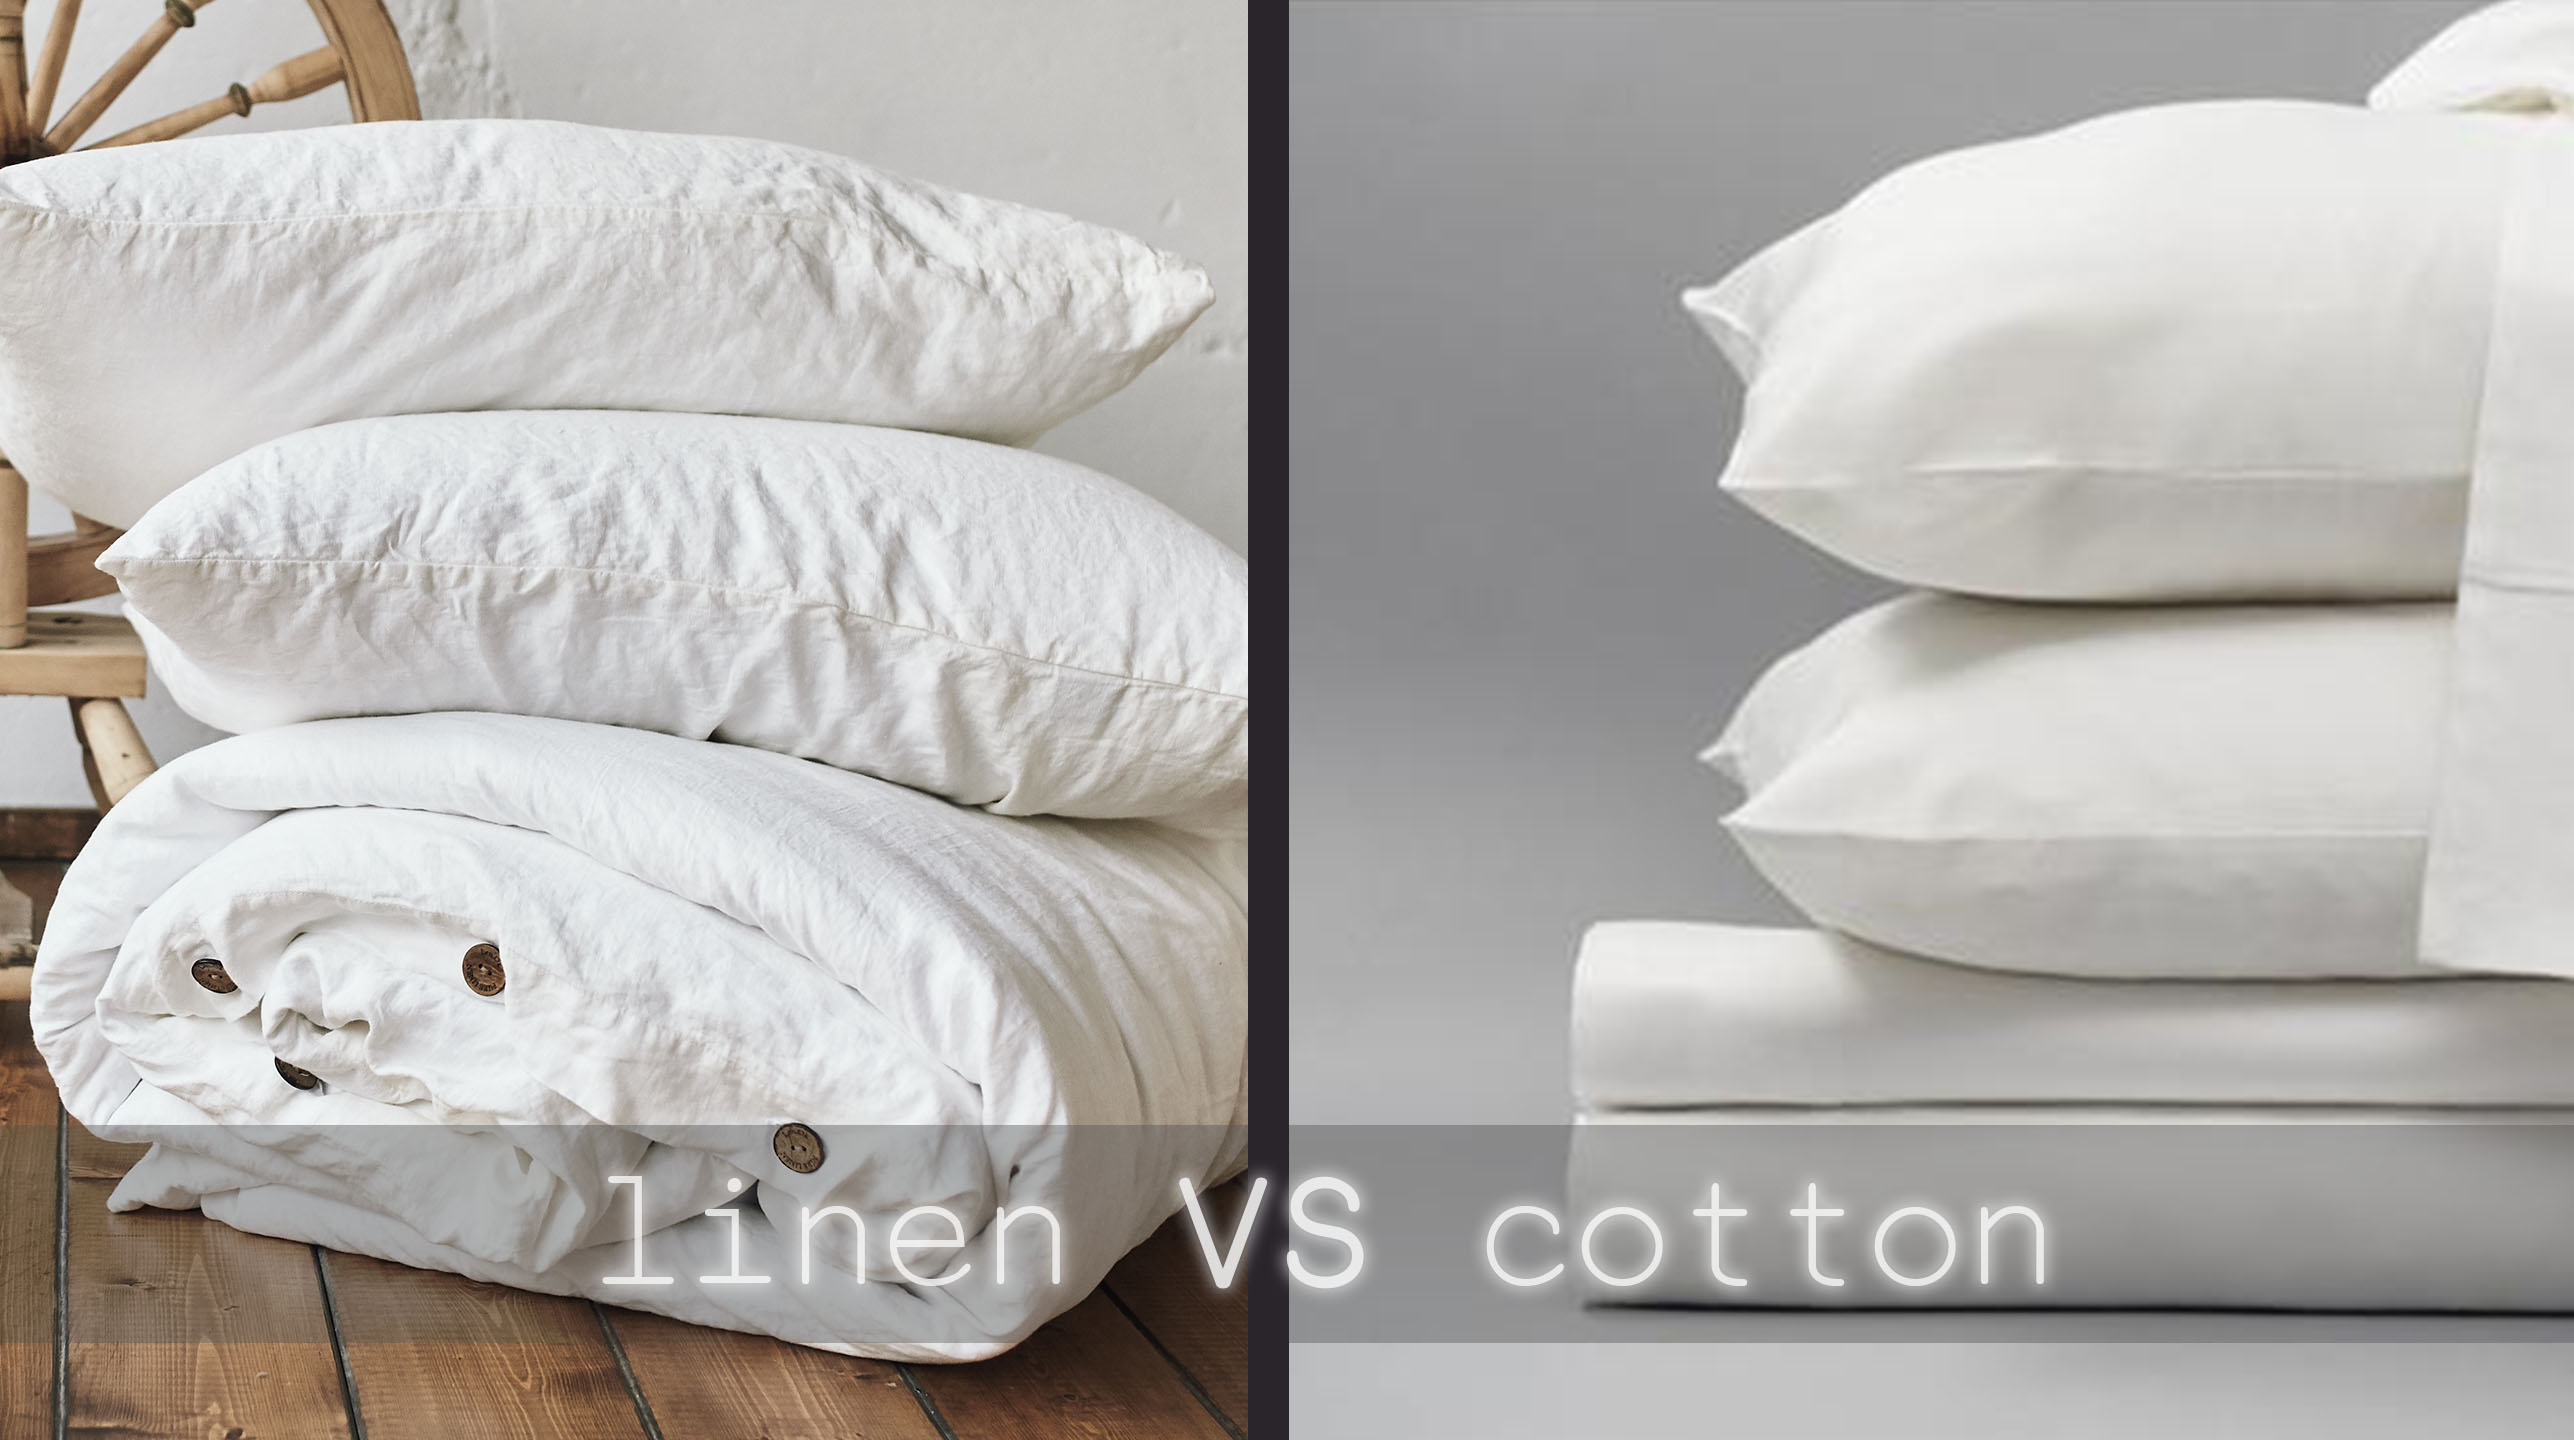 what is better - linen or cotton